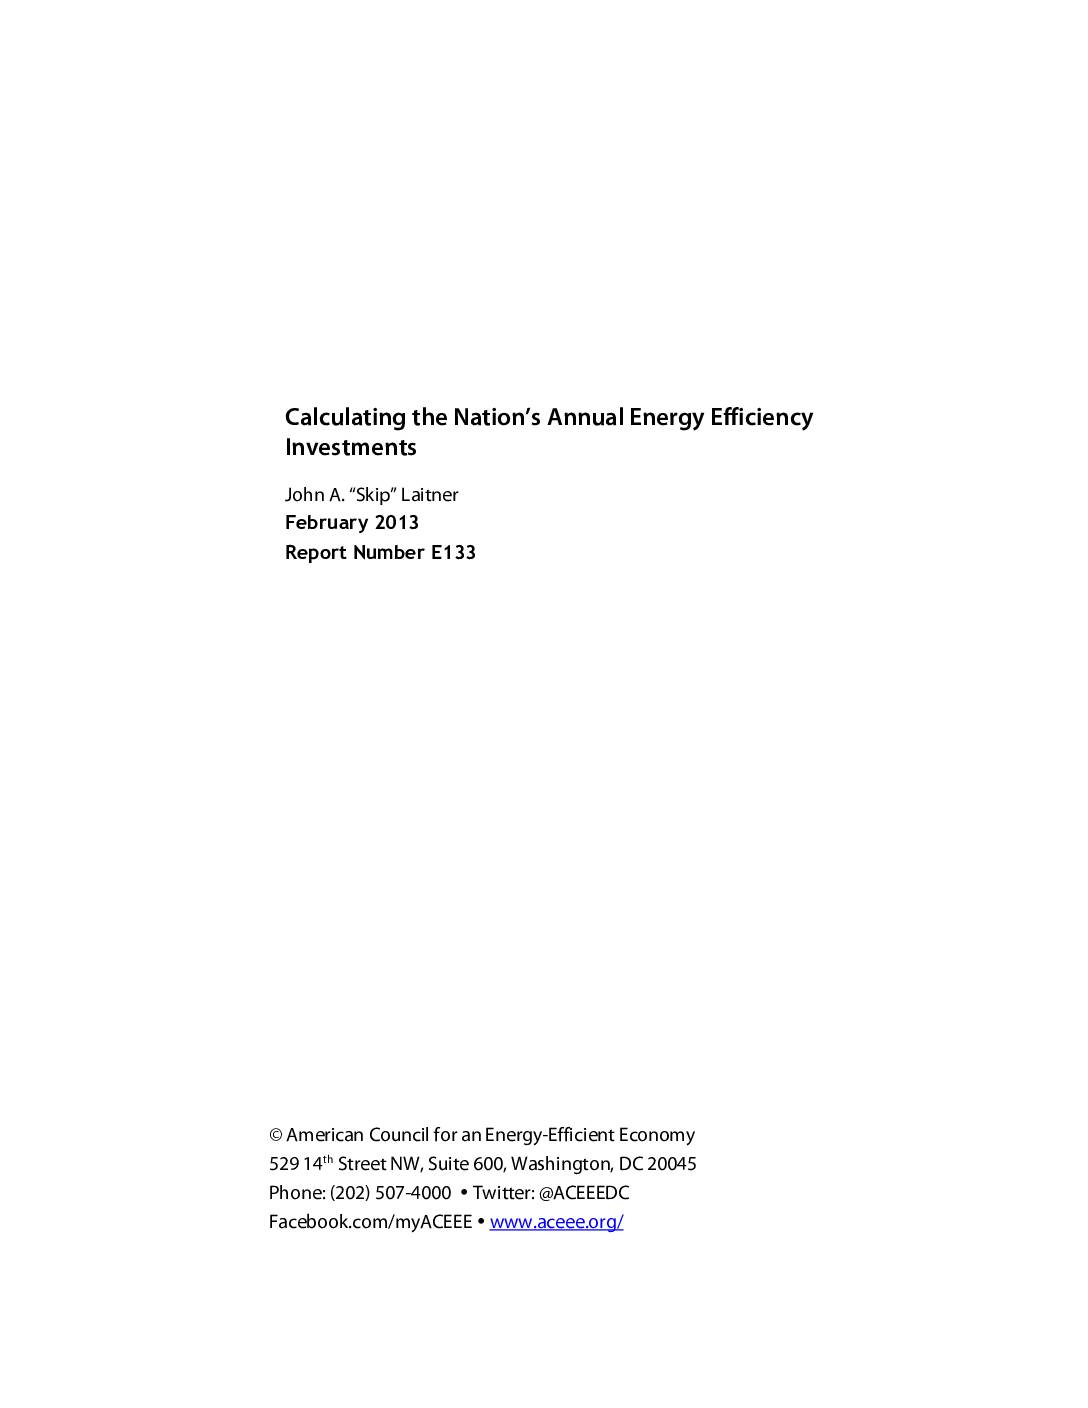 Calculating the Nation’s Annual Energy Efficiency Investments